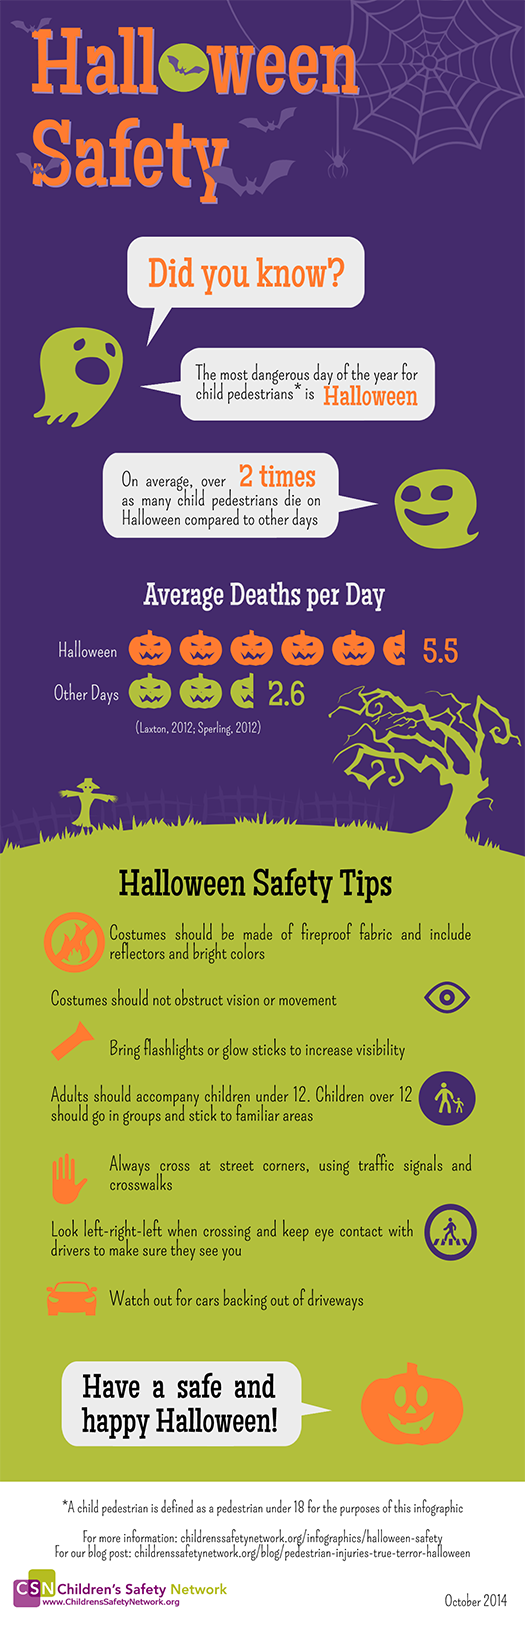 The deadliest day of the year for child pedestrians is Halloween. On average, over two times as many child pedestrians die on Halloween compared to other days. Read Halloween safety facts and tips in our infographic. Have a safe and happy Halloween!